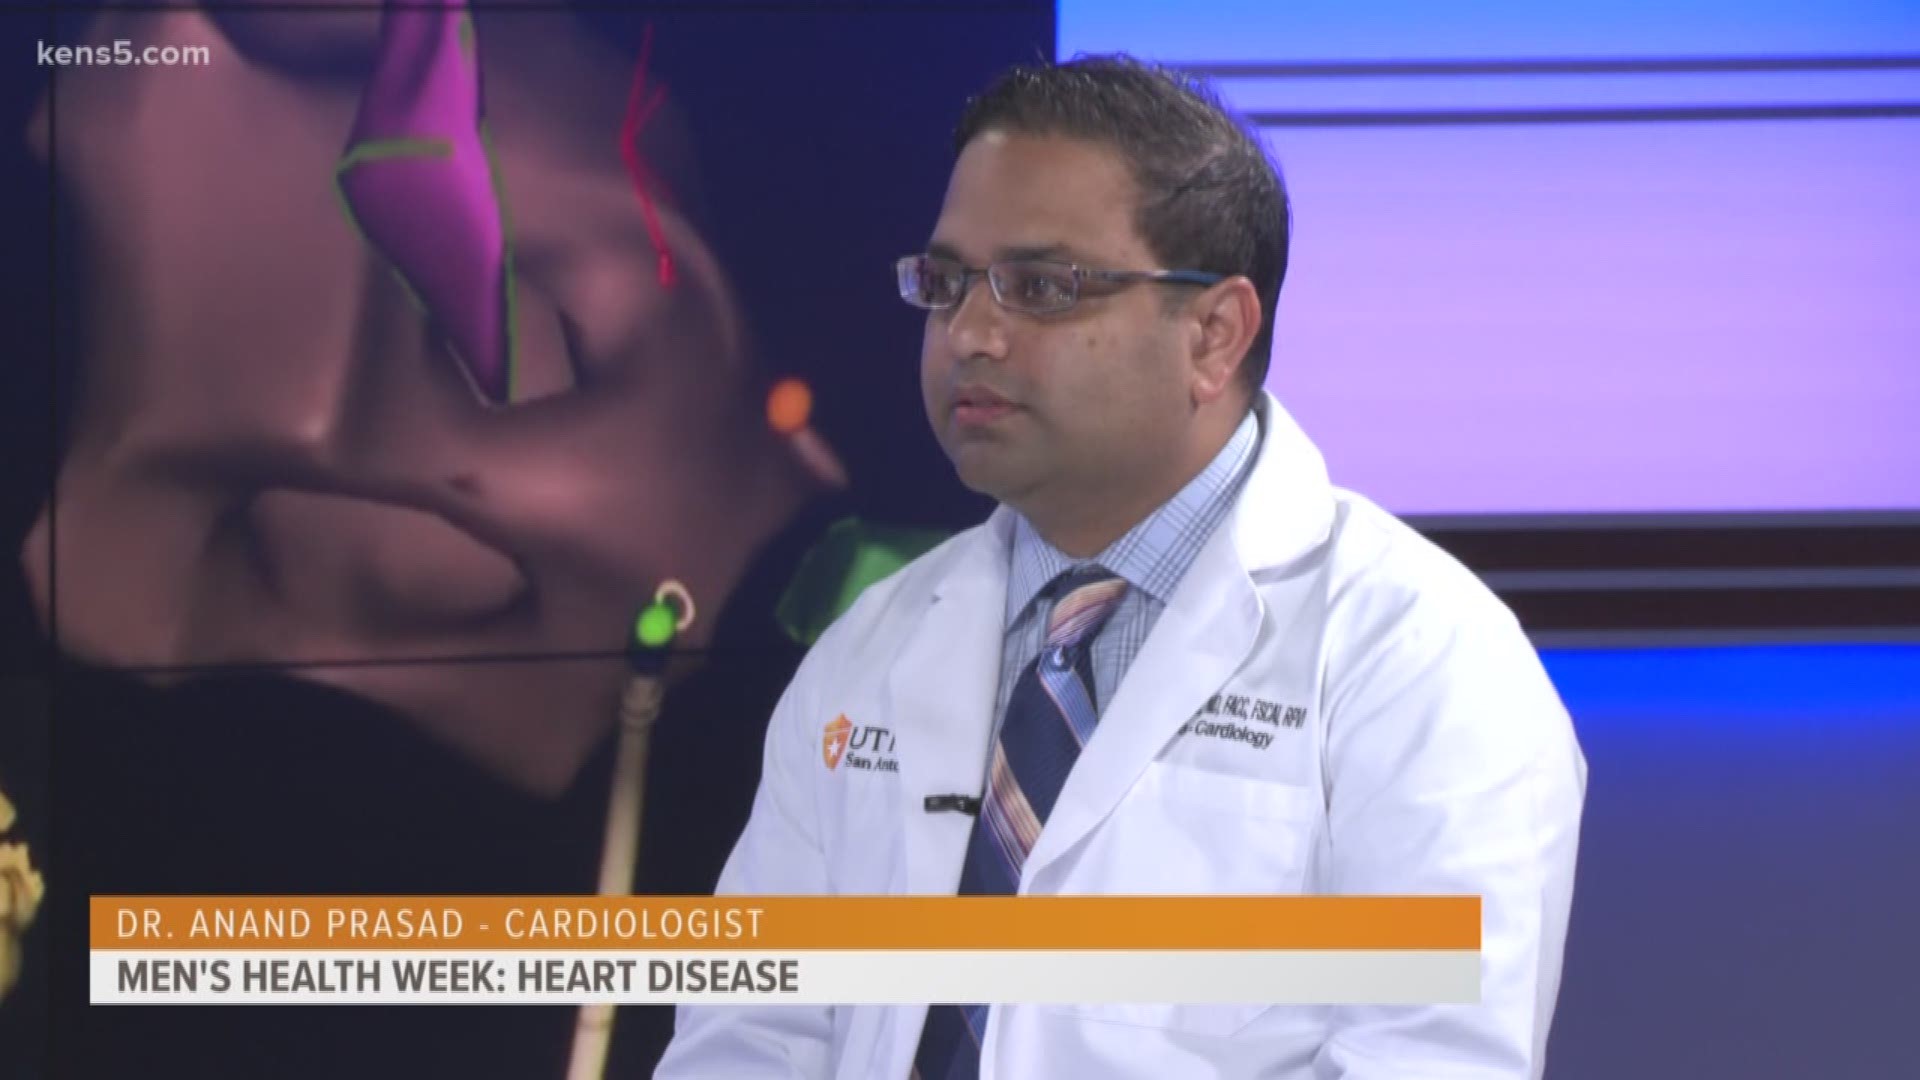 Heart disease is the leading cause of death in the United States. Cardiologist, Dr. Anand Prasad visits the KENS 5 studios to talk about risk factors for heart disease.